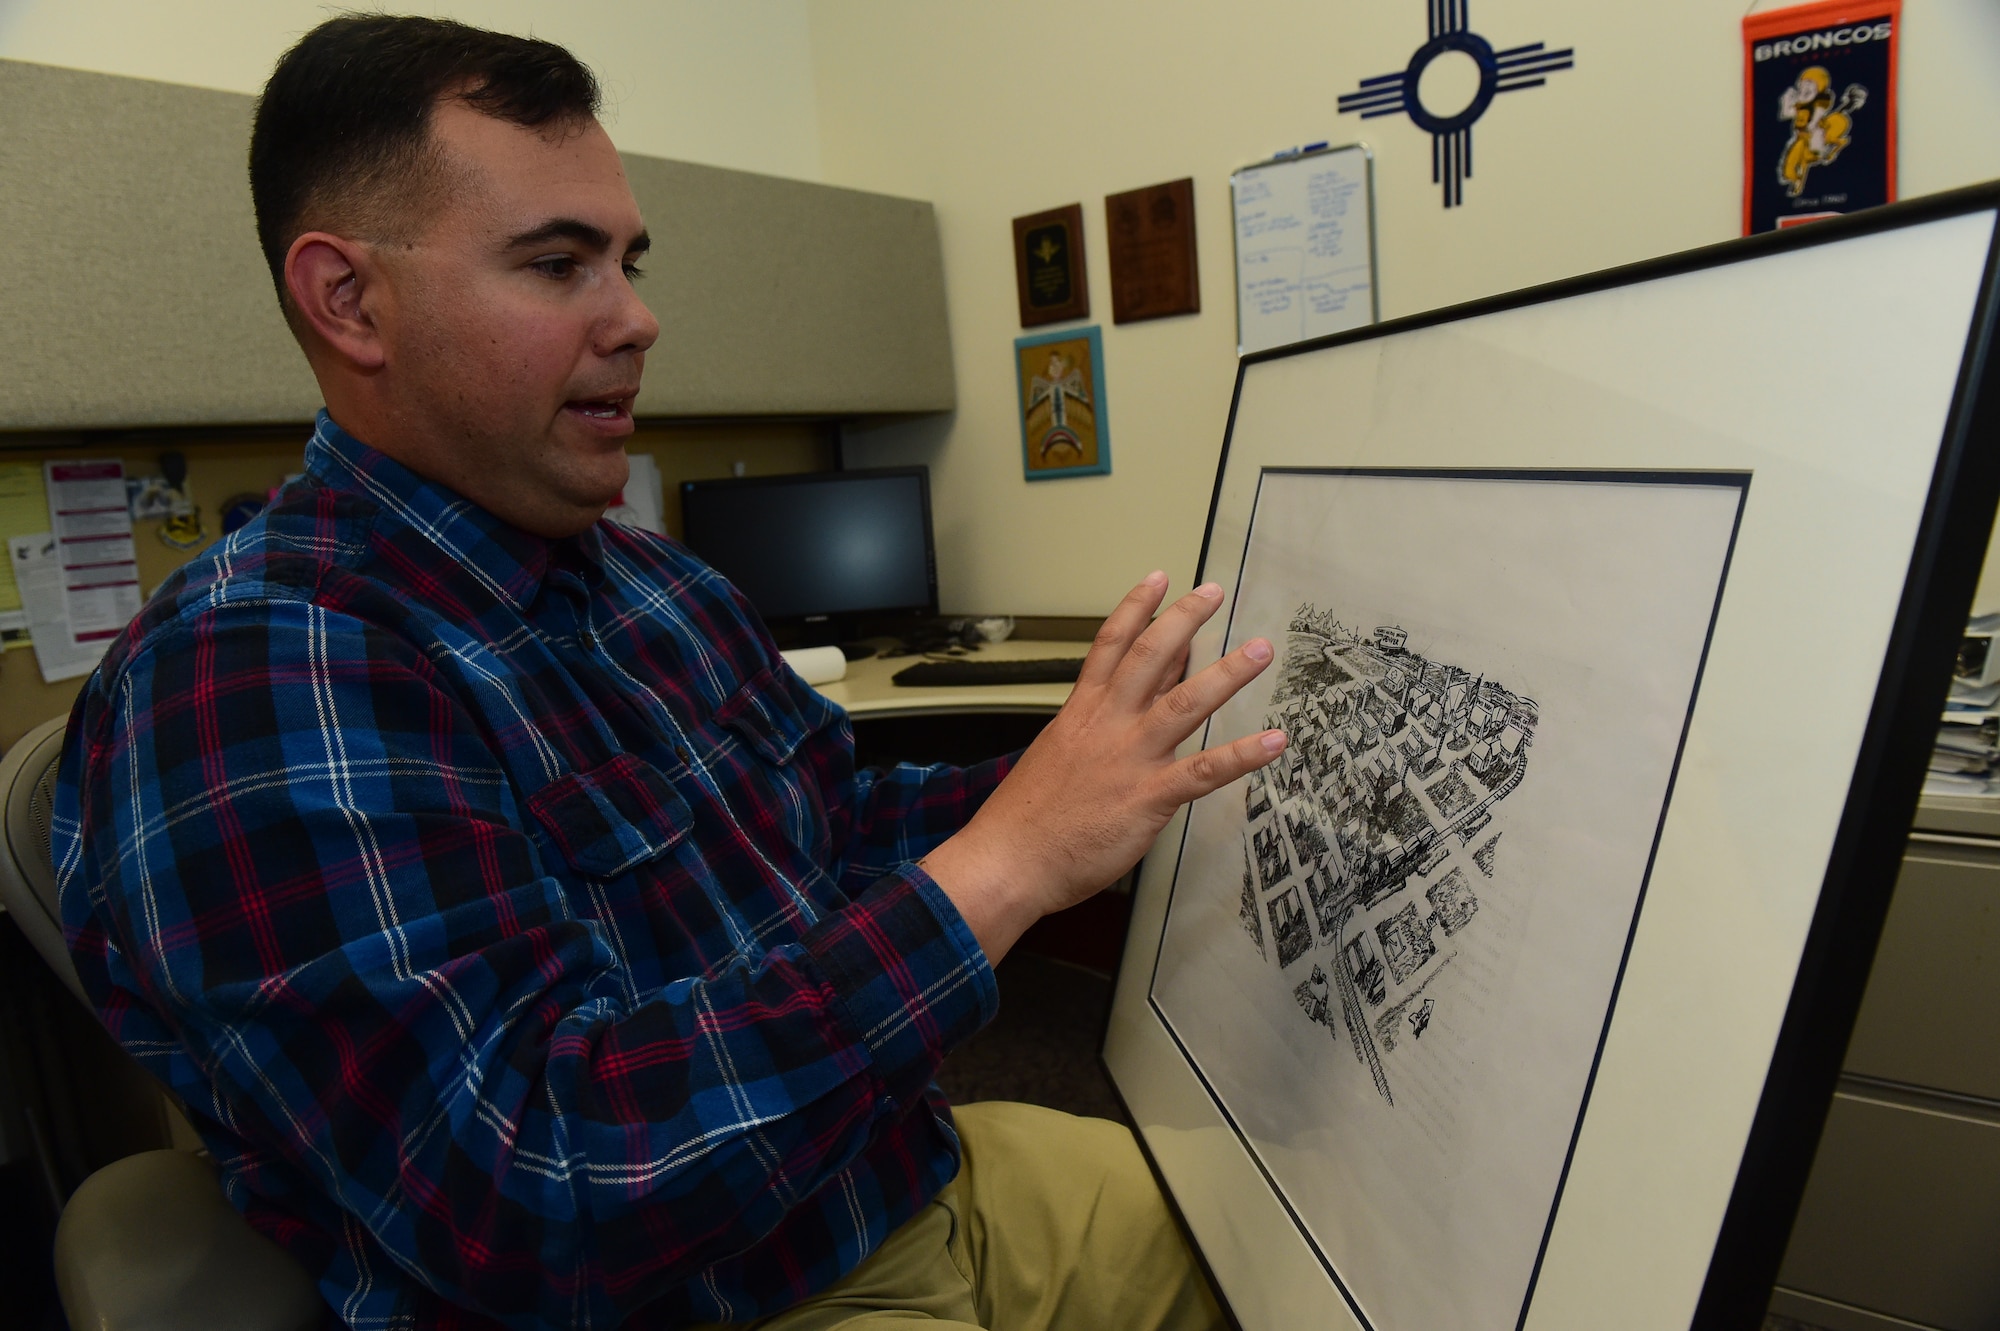 Christopher McCune, 460th Space Wing historian, explains a historical map Sept. 26, 2016, at the 460th Space Wing Headquarters building on Buckley AFB, Colo. As a historian, McCune must provide commanders with historical information to broaden their decision making ability that can affect today’s mission. (U.S. Air Force photo by Airman 1st Class Gabrielle Spradling/Released)